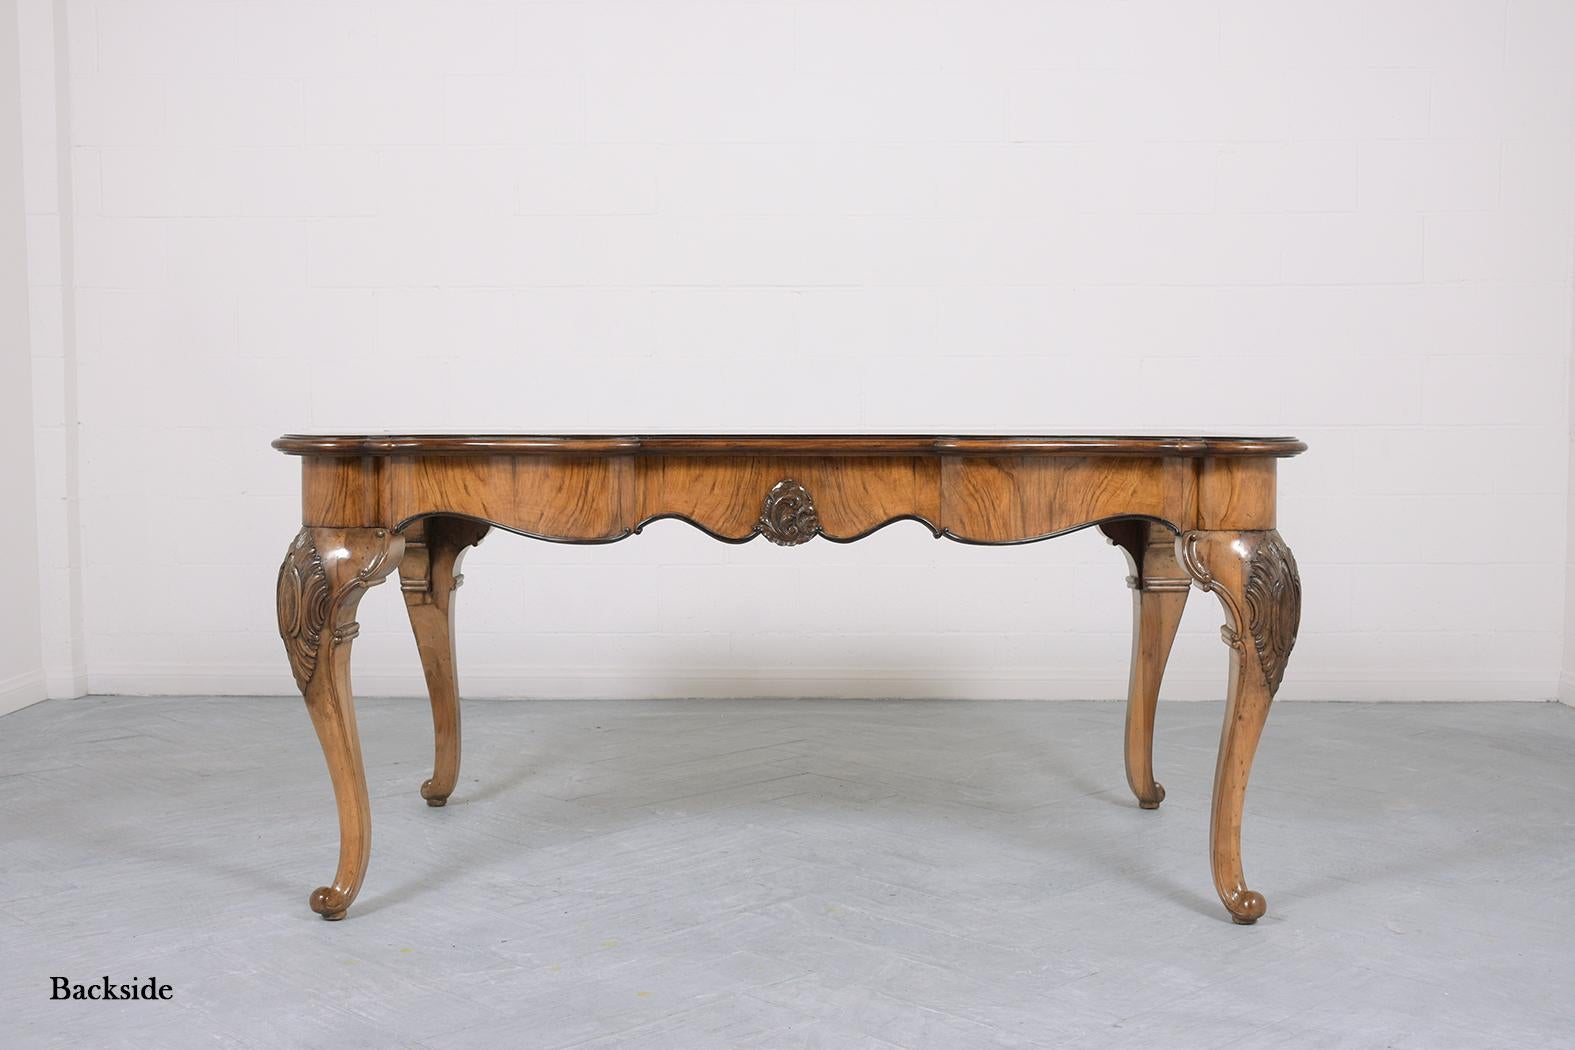 Late 19th-Century English Walnut Dining Table with Carved Cabriole Legs 4